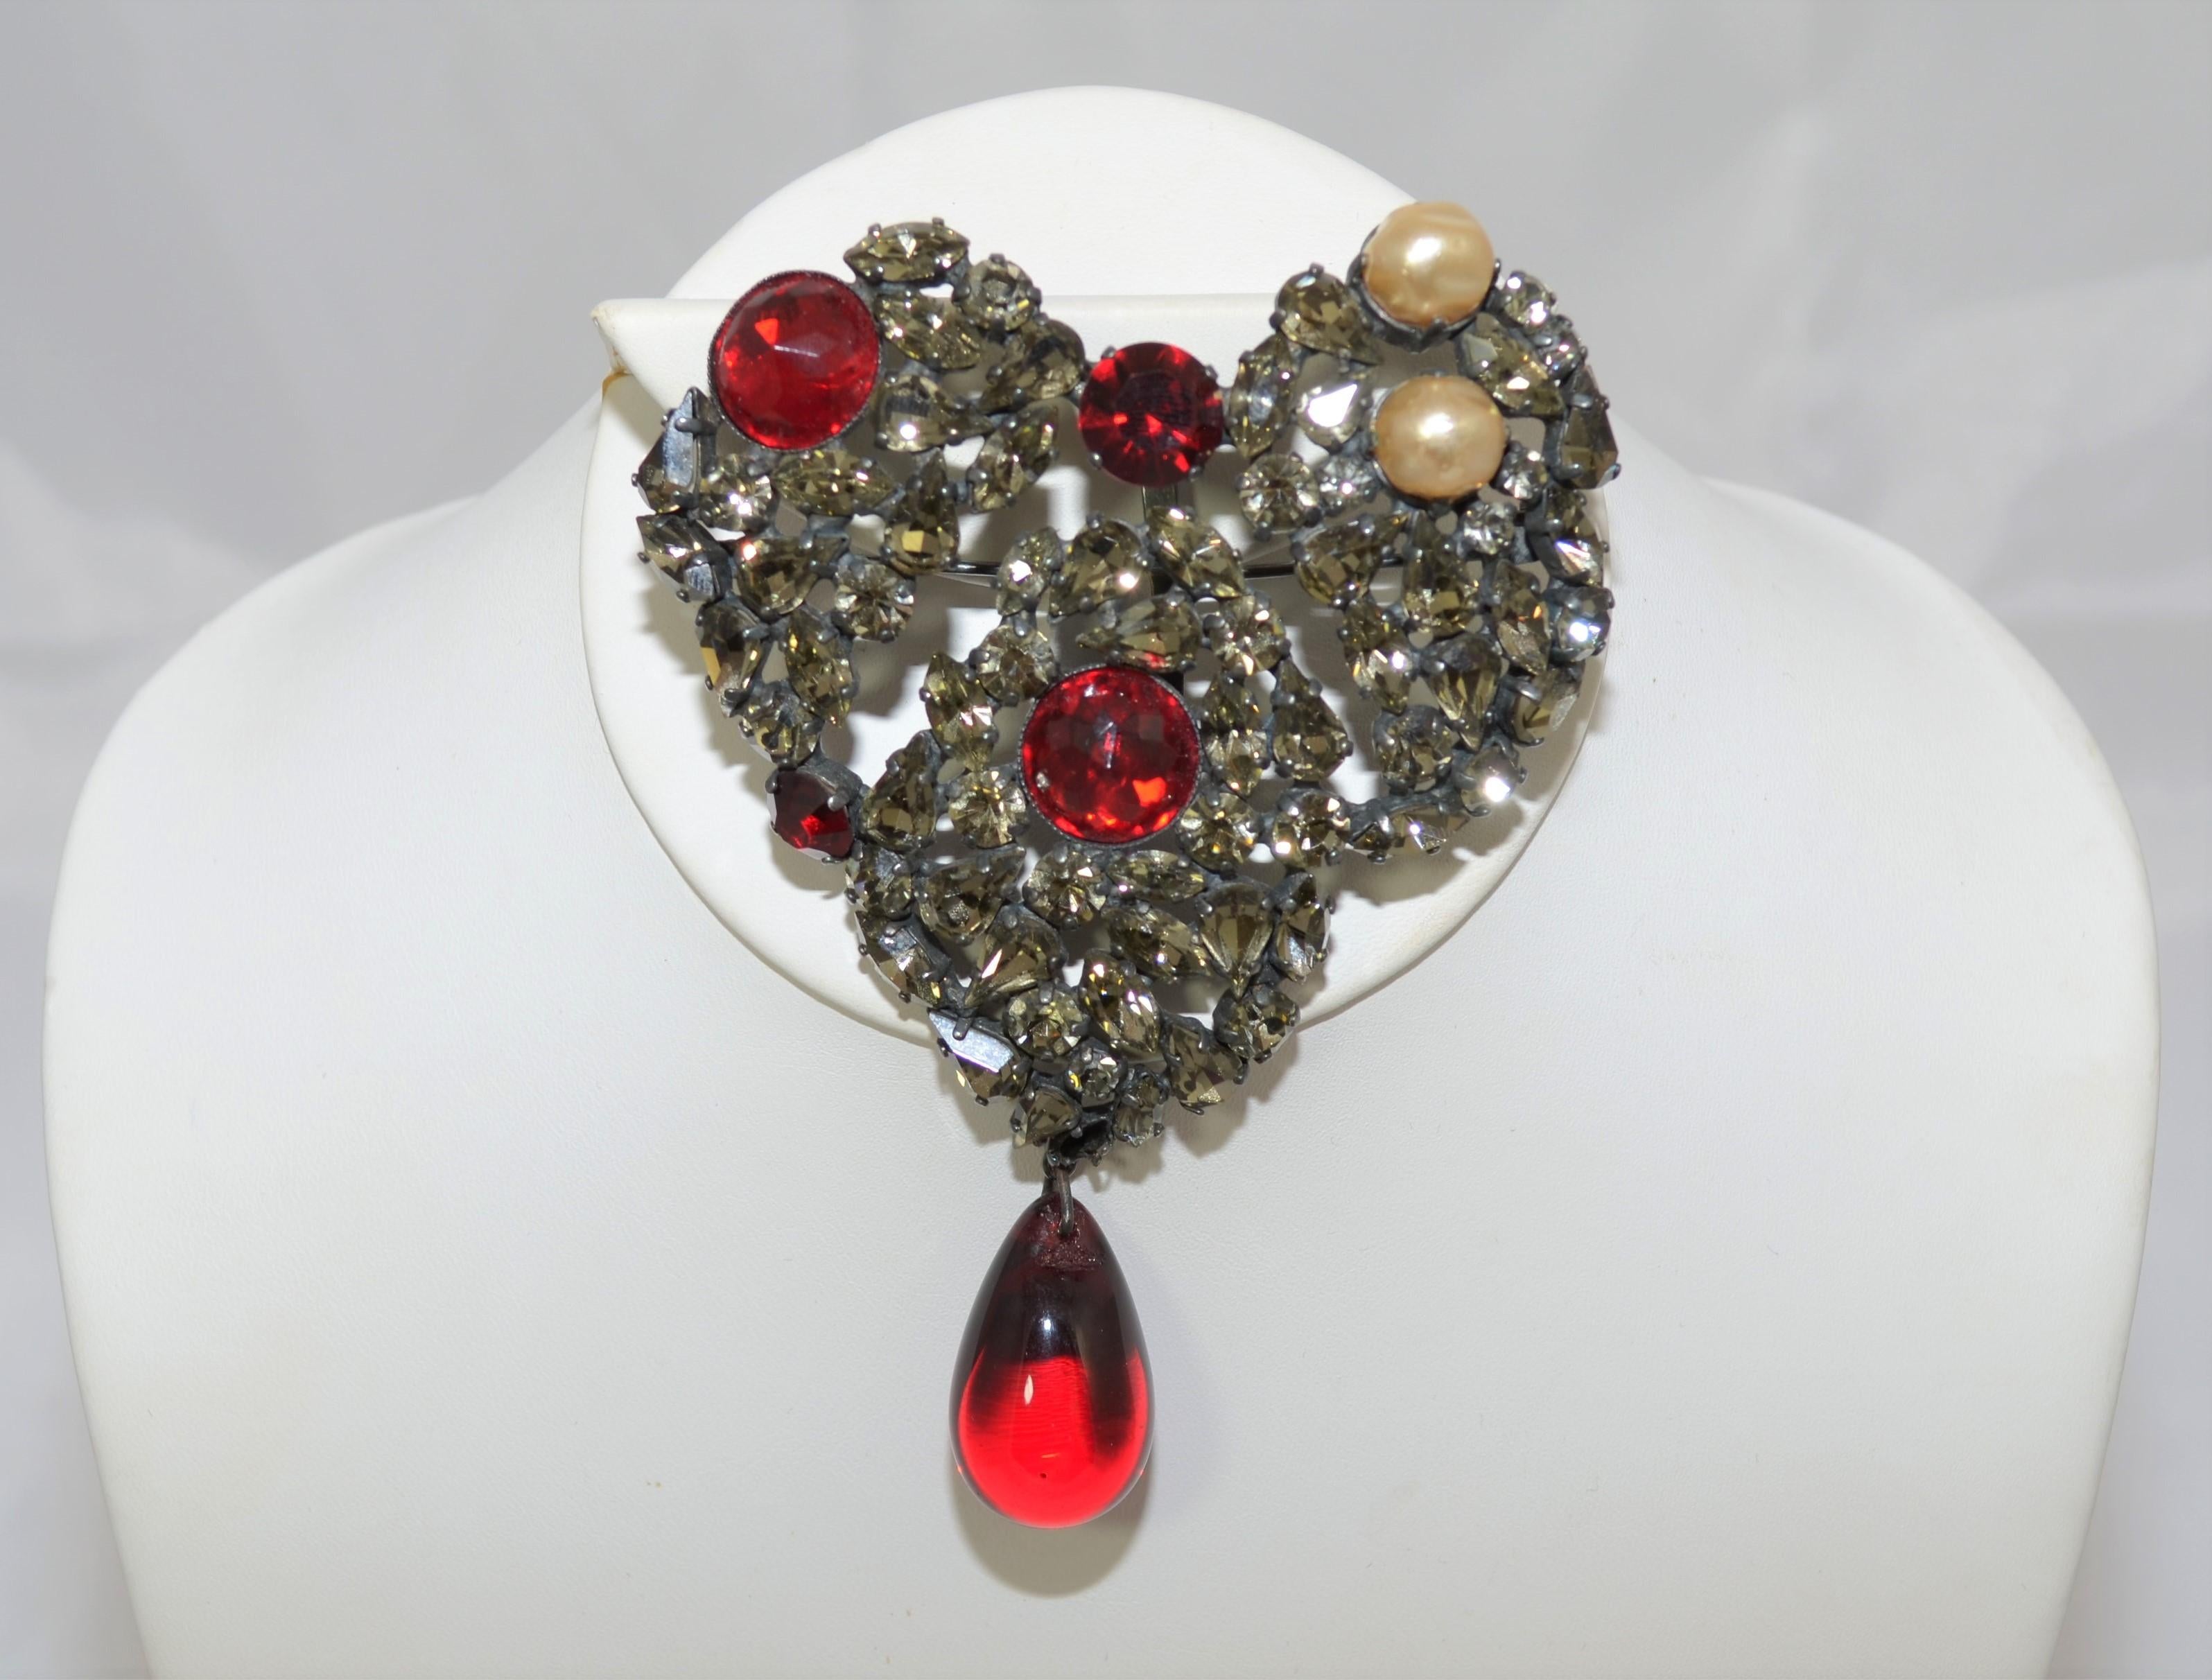 Vintage 1980's YSL Rive Gauche Heart Brooch/Pendant with Pearls 1